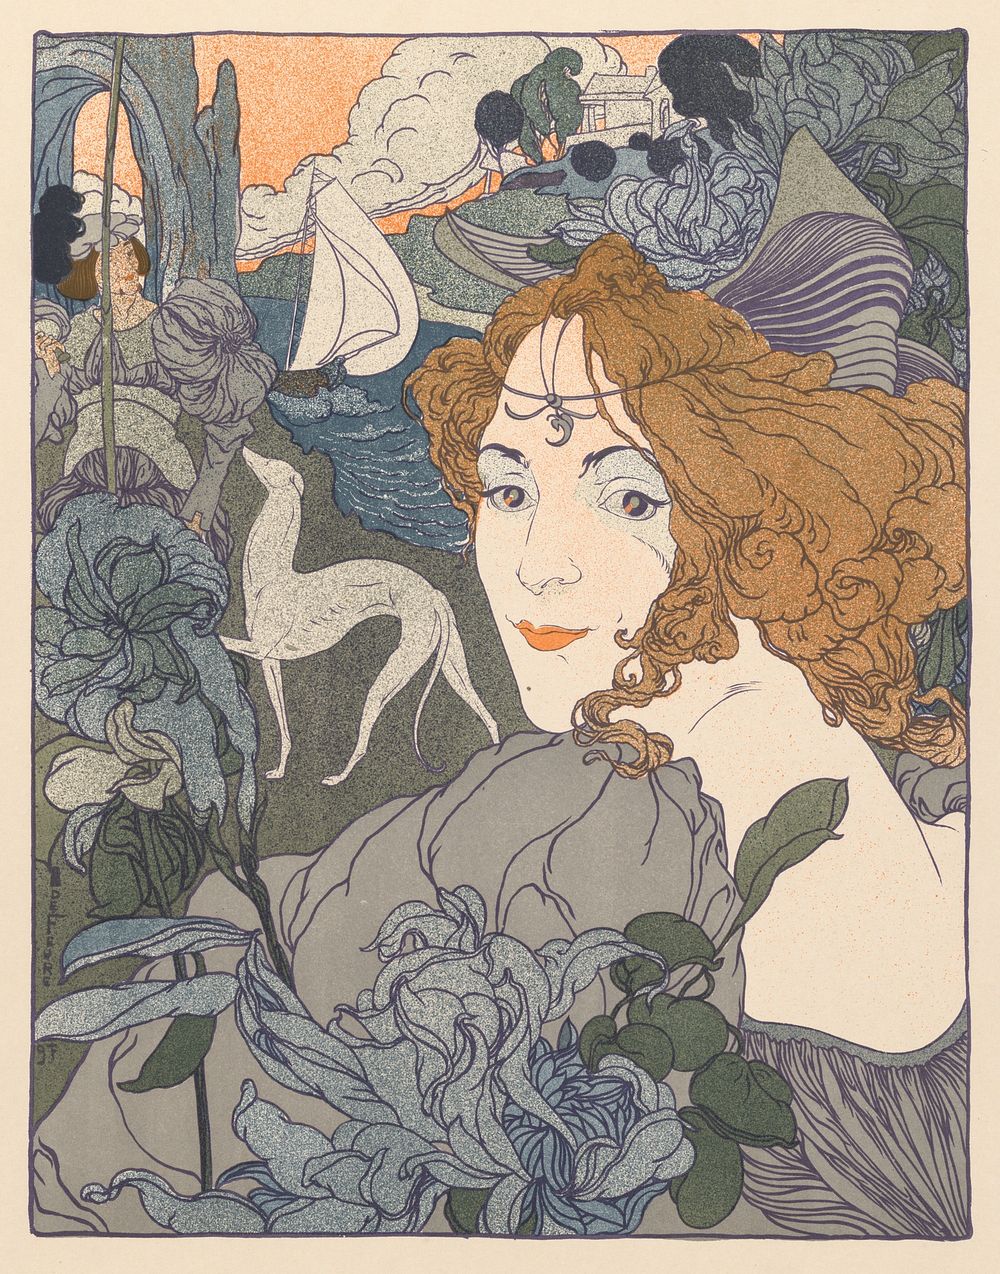 Retour (1897) print in high resolution by Georges de Feure.  